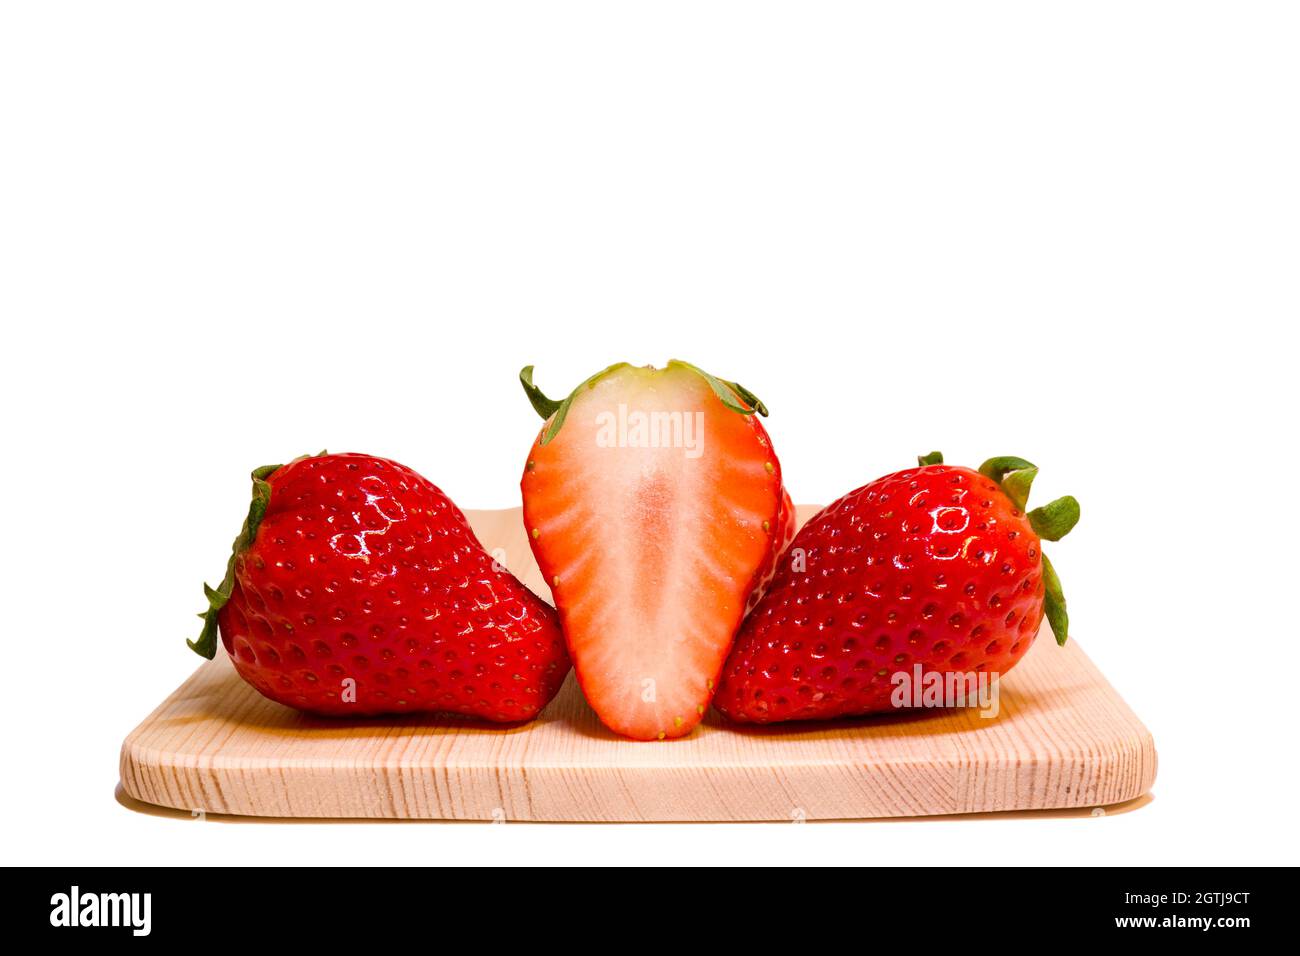 Close Up Of Strawberries Full And Half Size Placing Together On Wooden Plate With Clipping Path Stock Photo